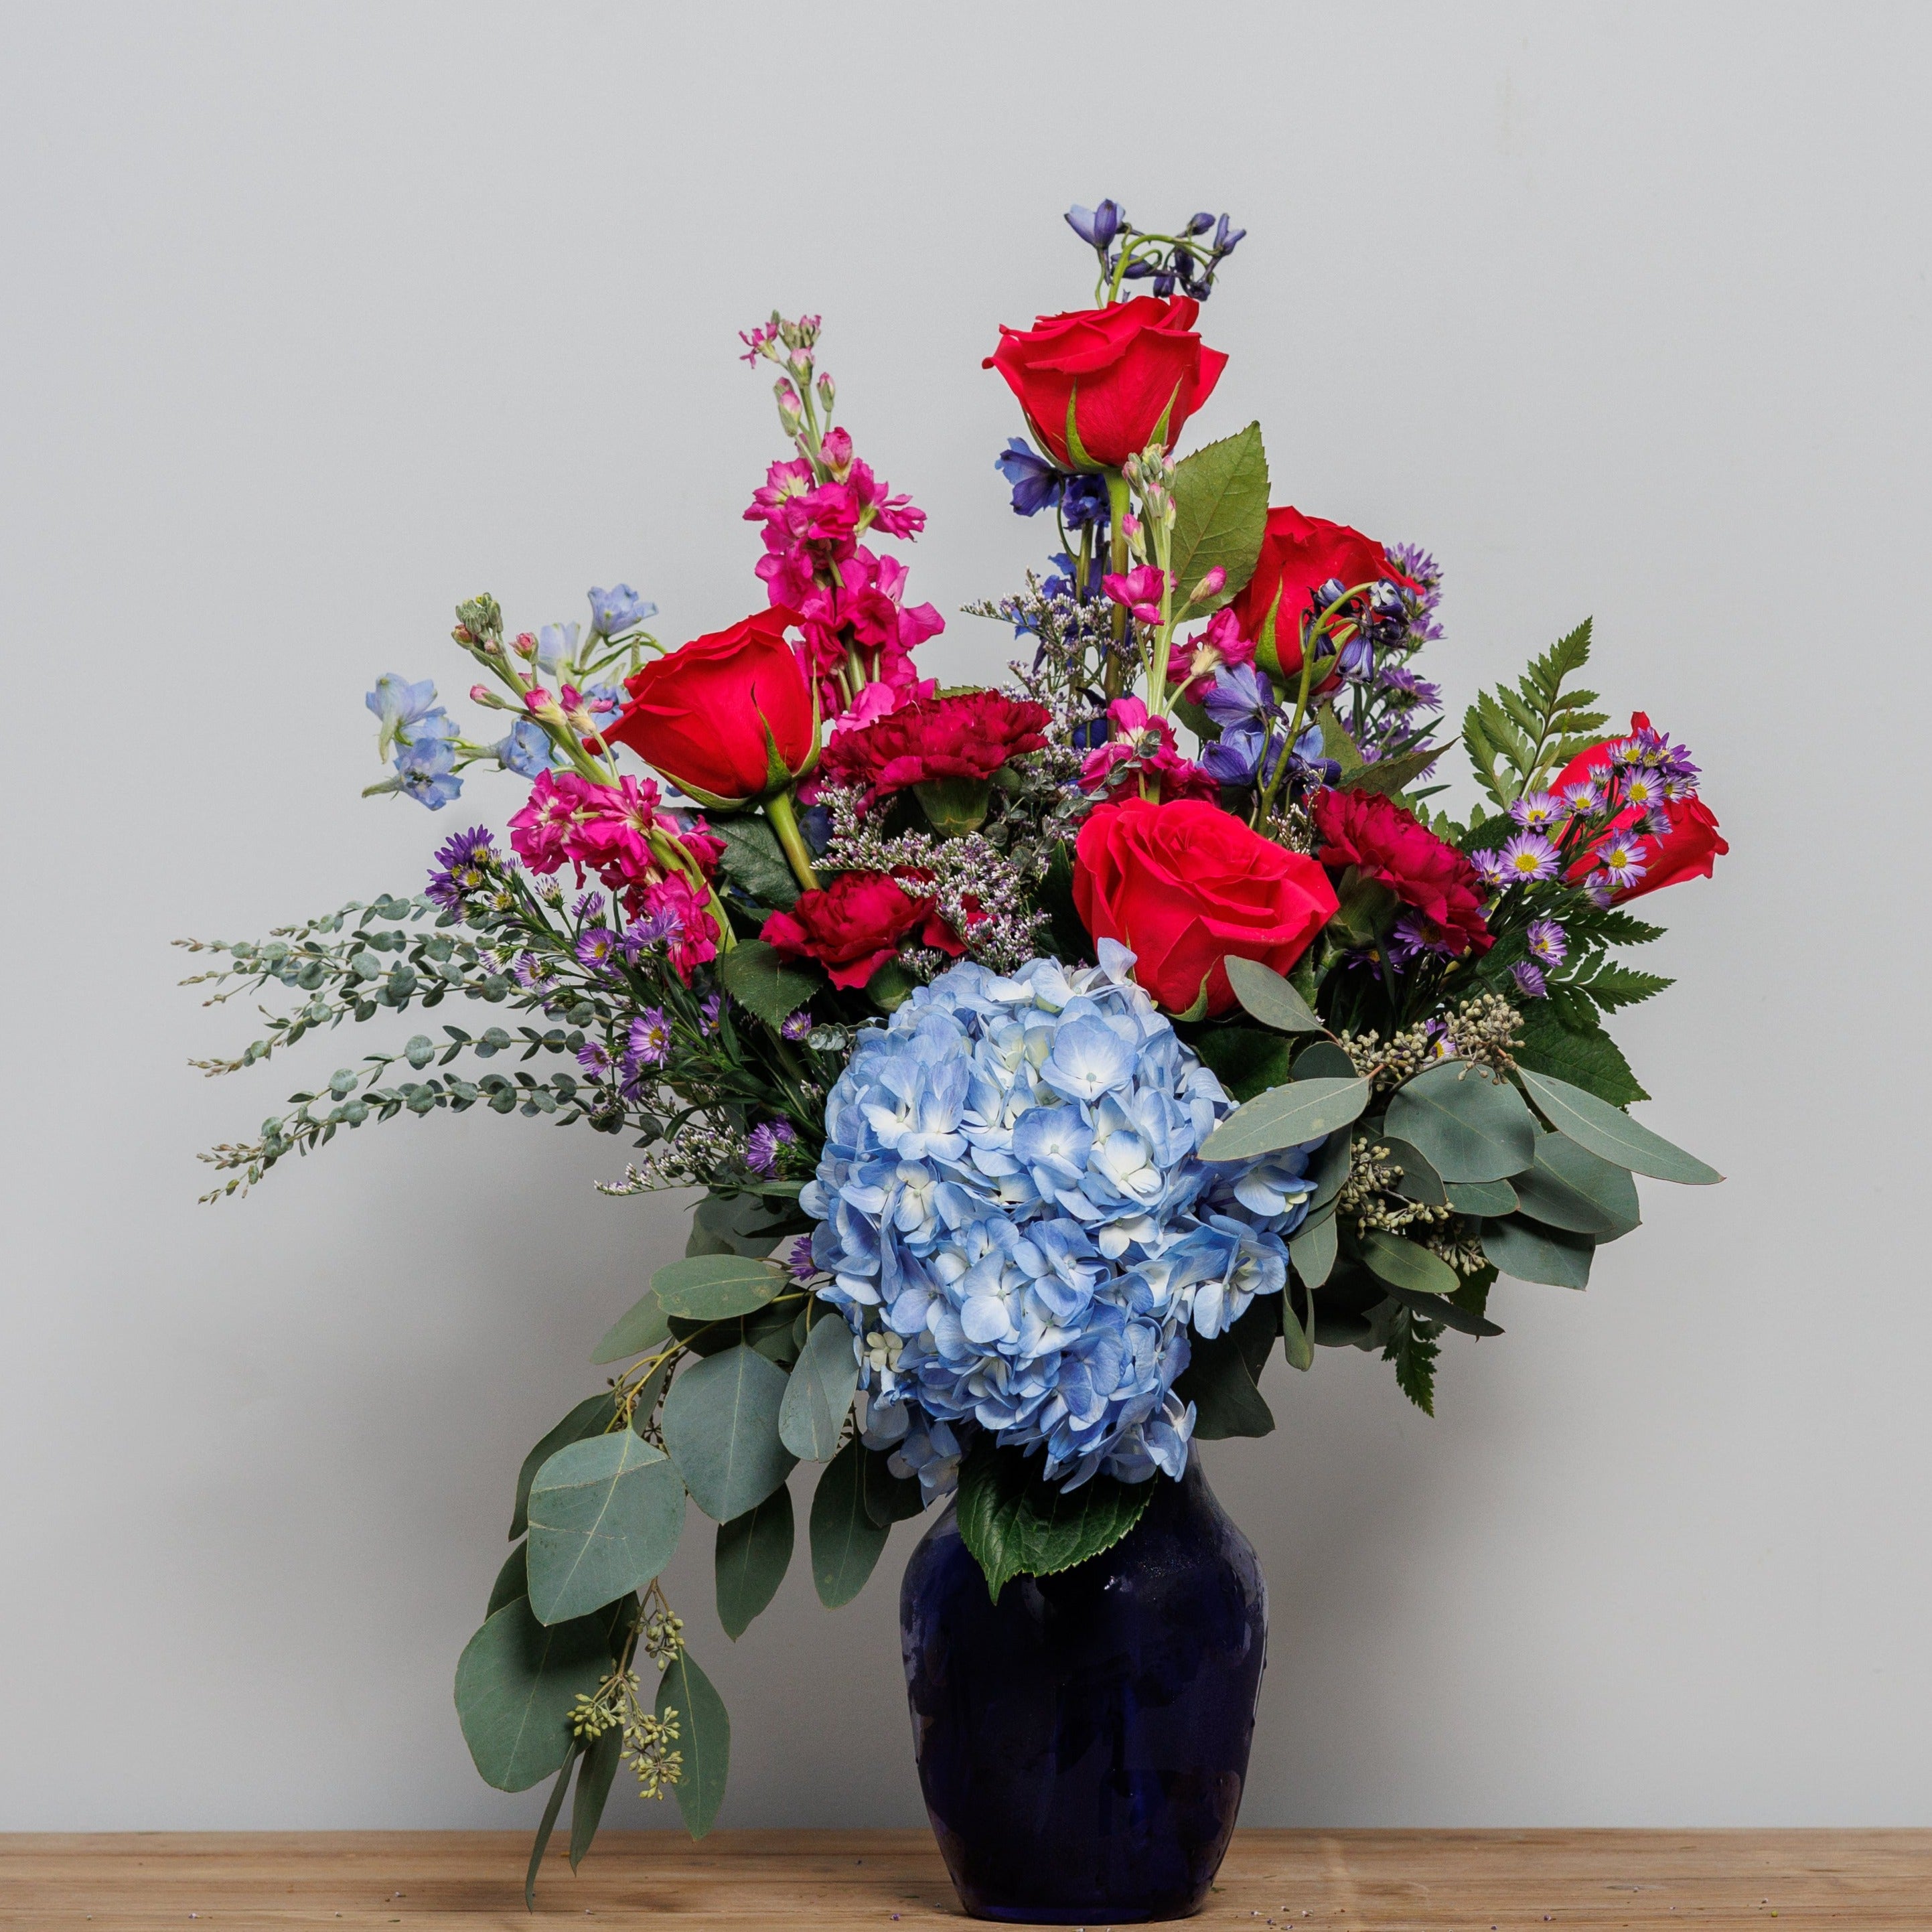 Hot pink roses with blue delphinium and a blue hydrangea in a blue vase.